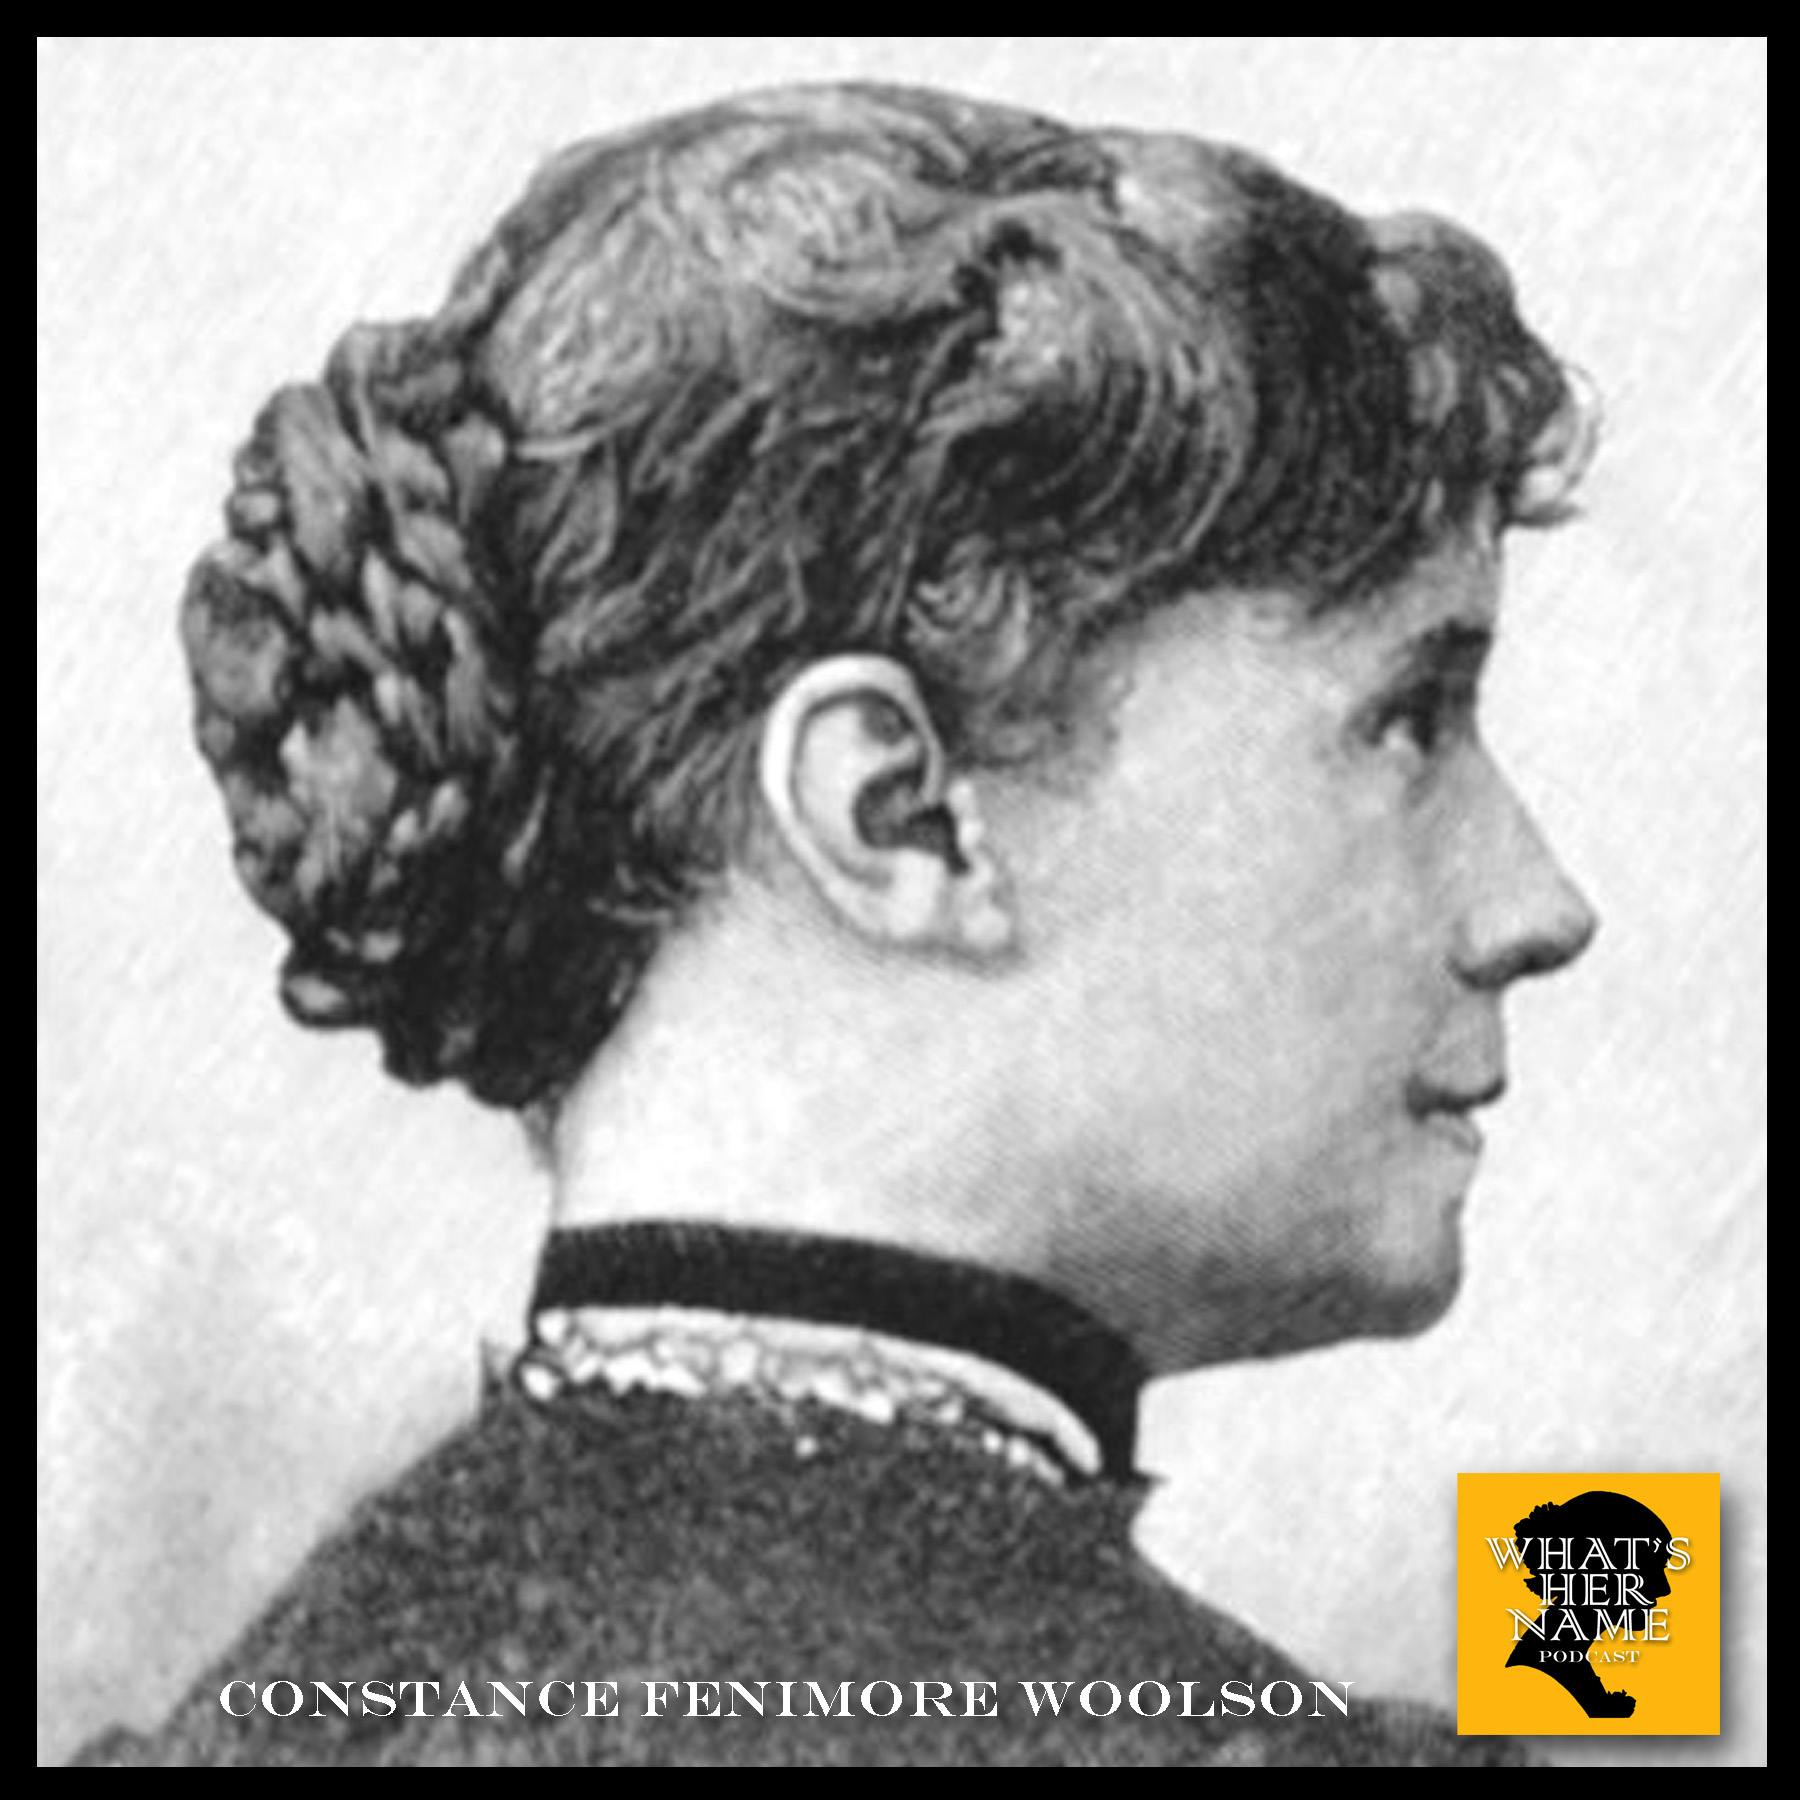 THE LADY NOVELIST Constance Fenimore Woolson